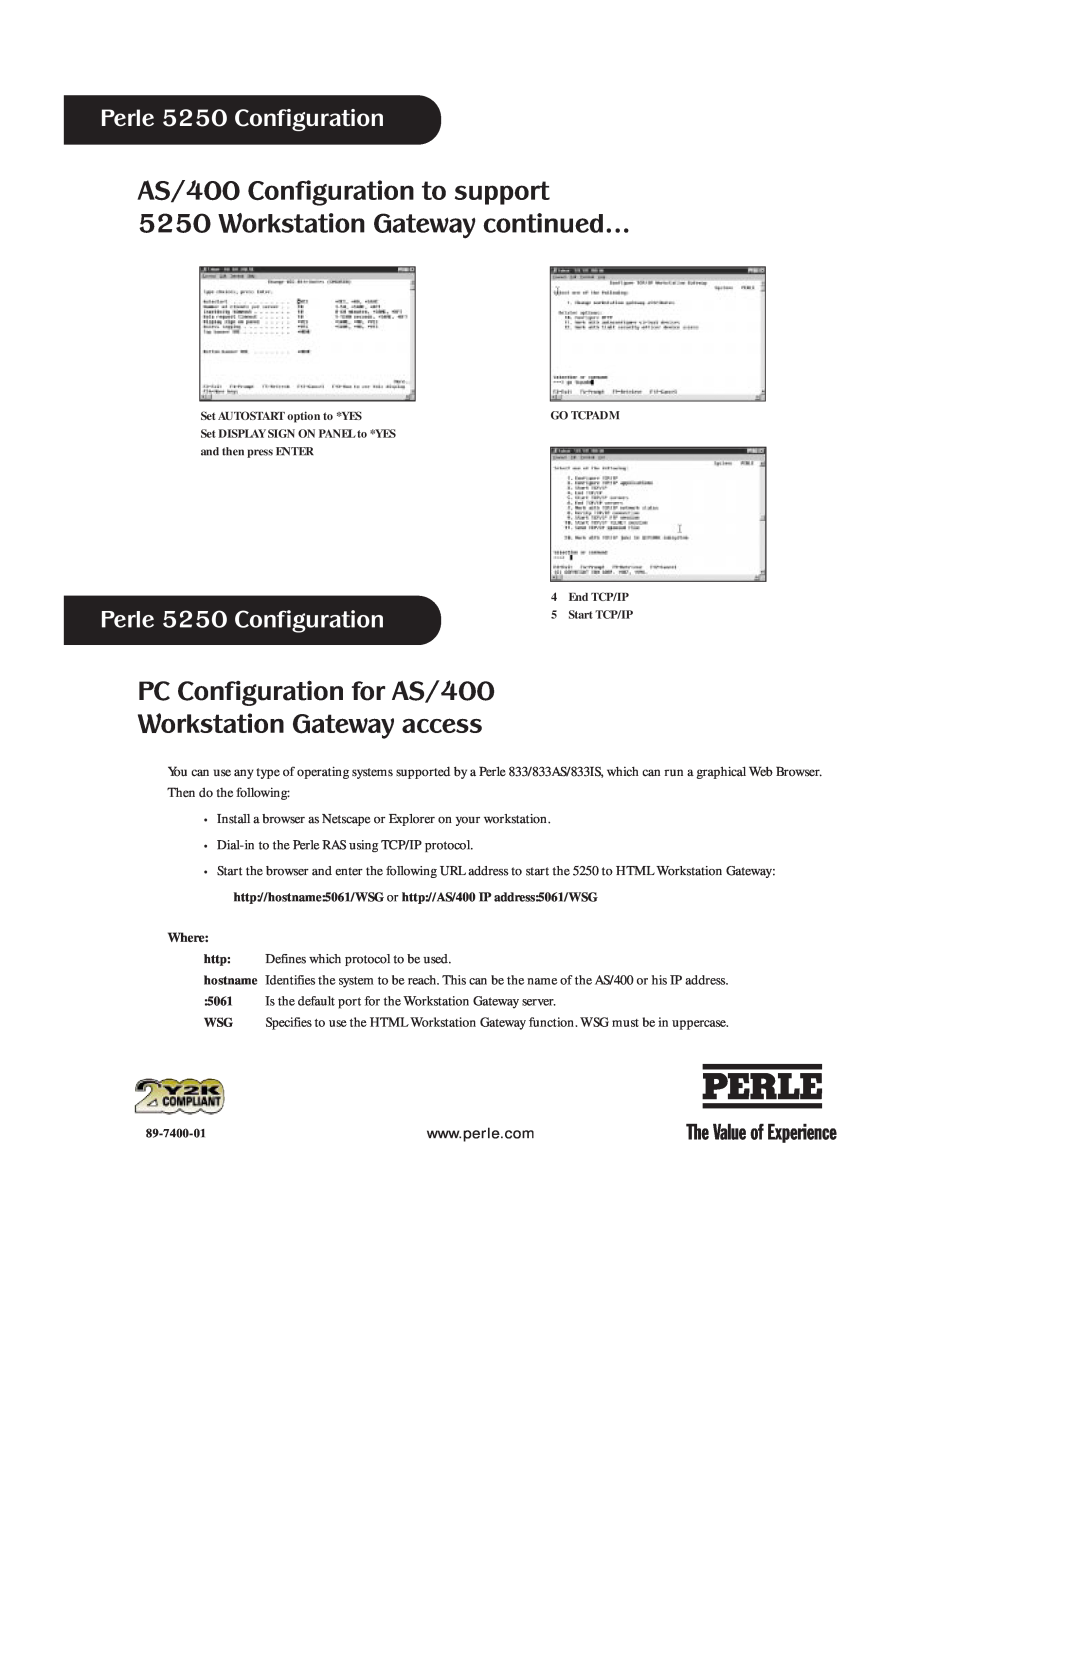 Perle Systems manual AS/400 Configuration to support 5250 Workstation Gateway continued, Where, Perle 5250 Configuration 